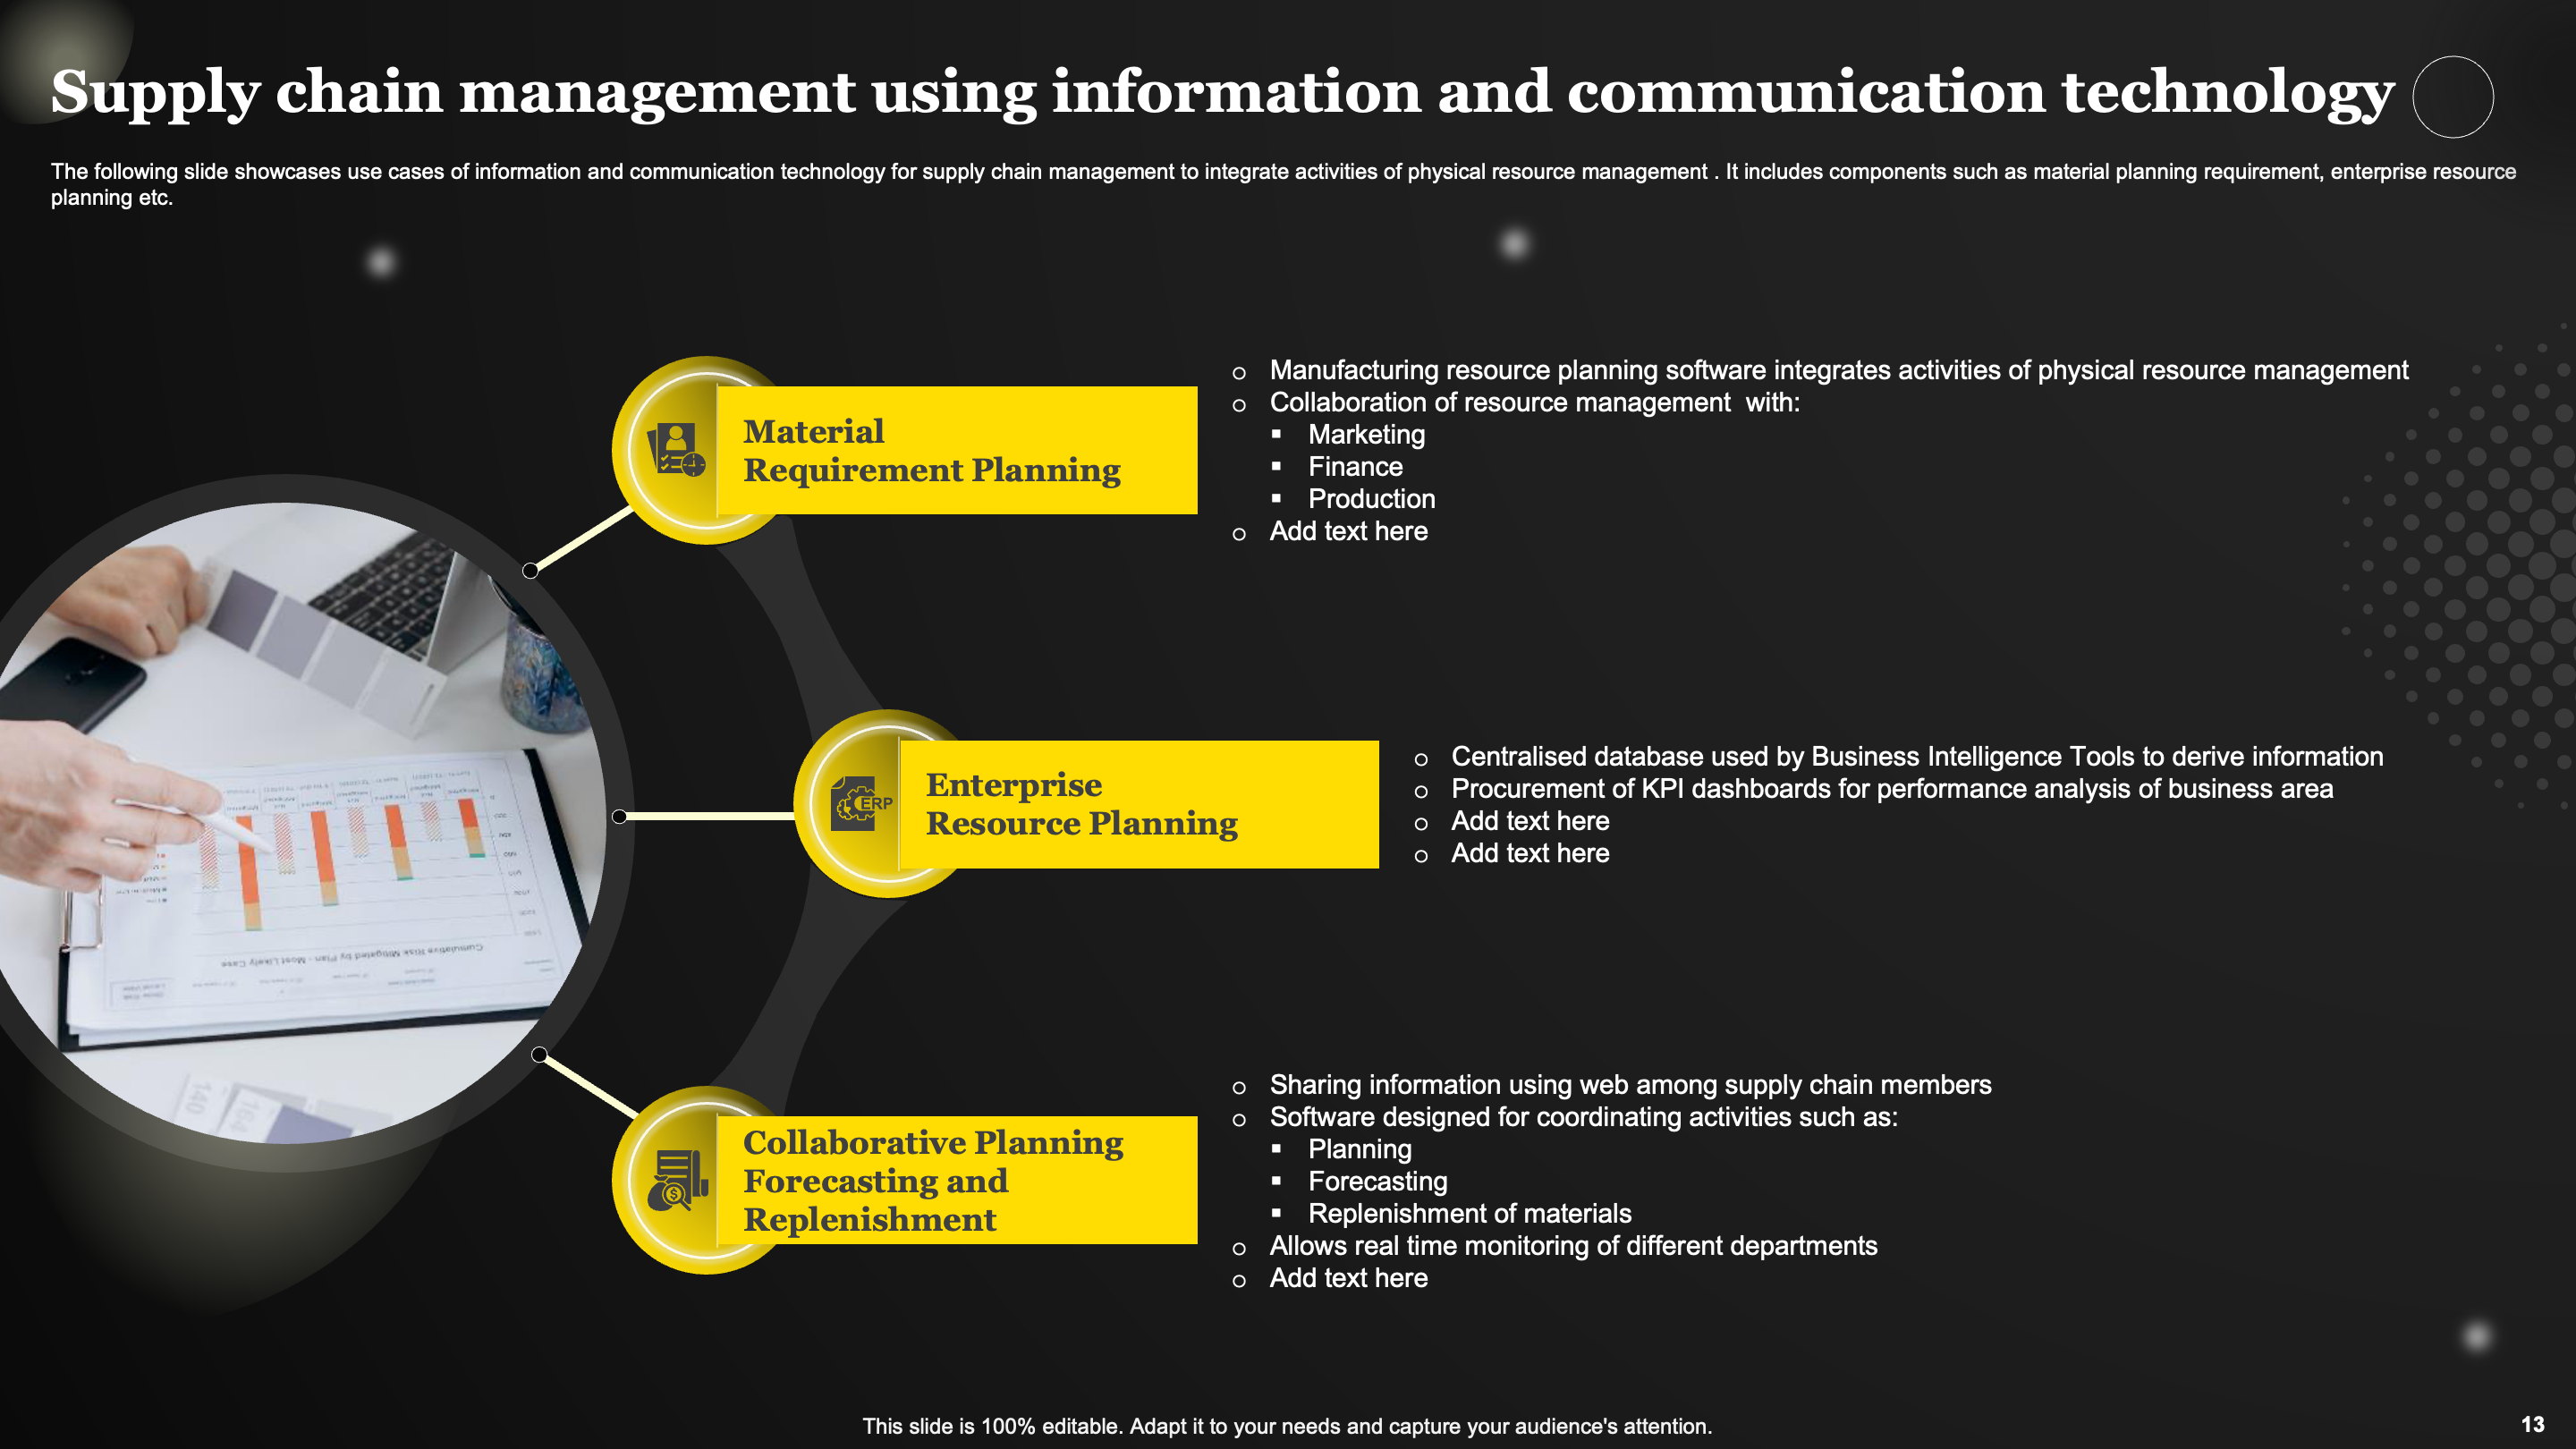 Supply Chain Management Using Information and Communication Technology